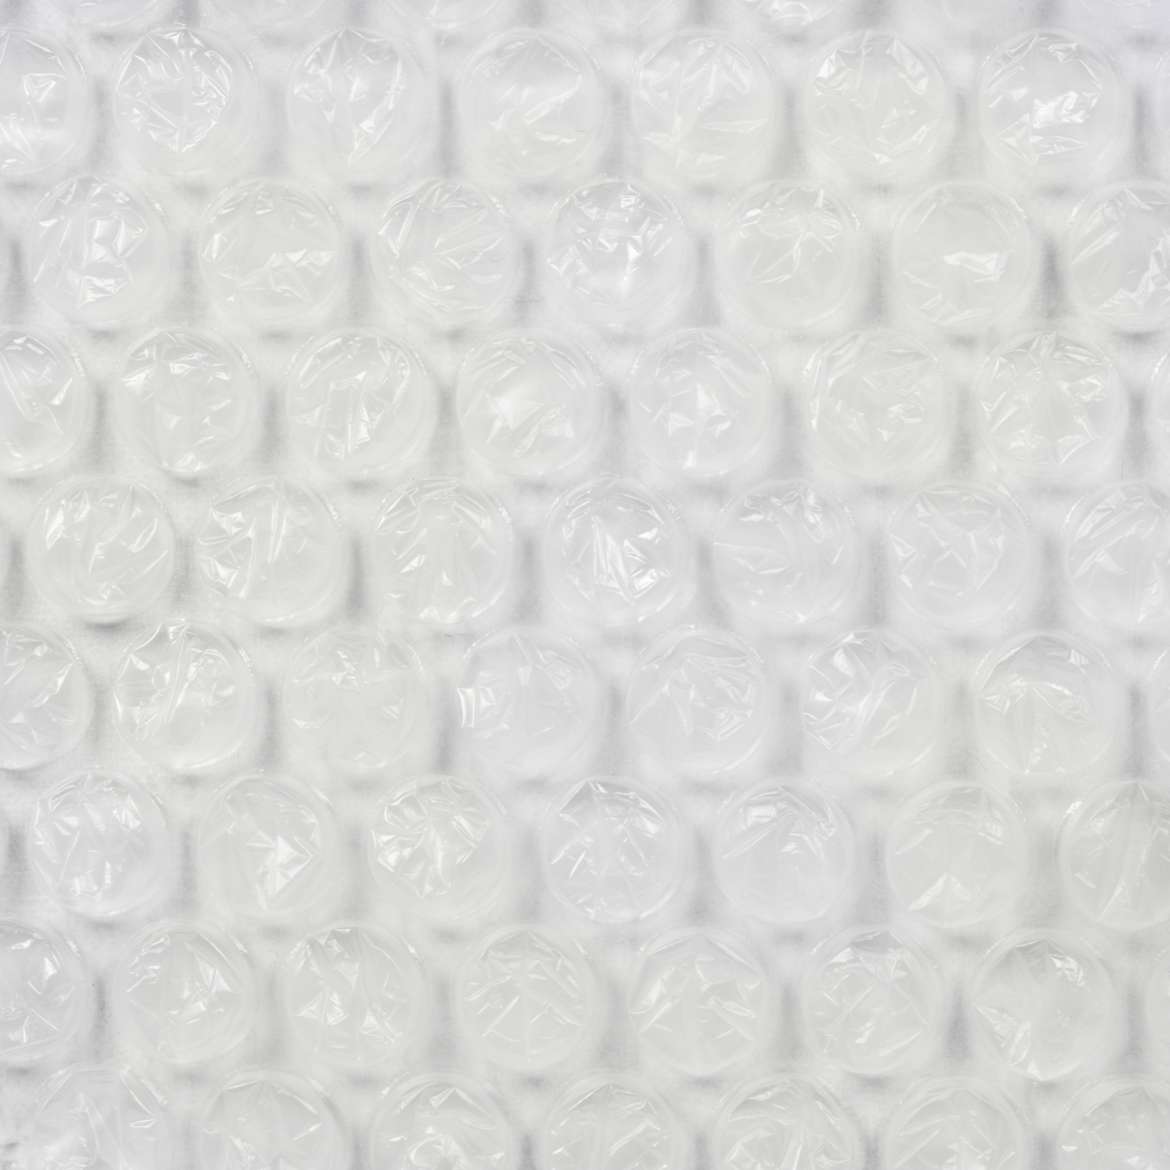 Duck® Brand Small Bubble Cushioning Wrap